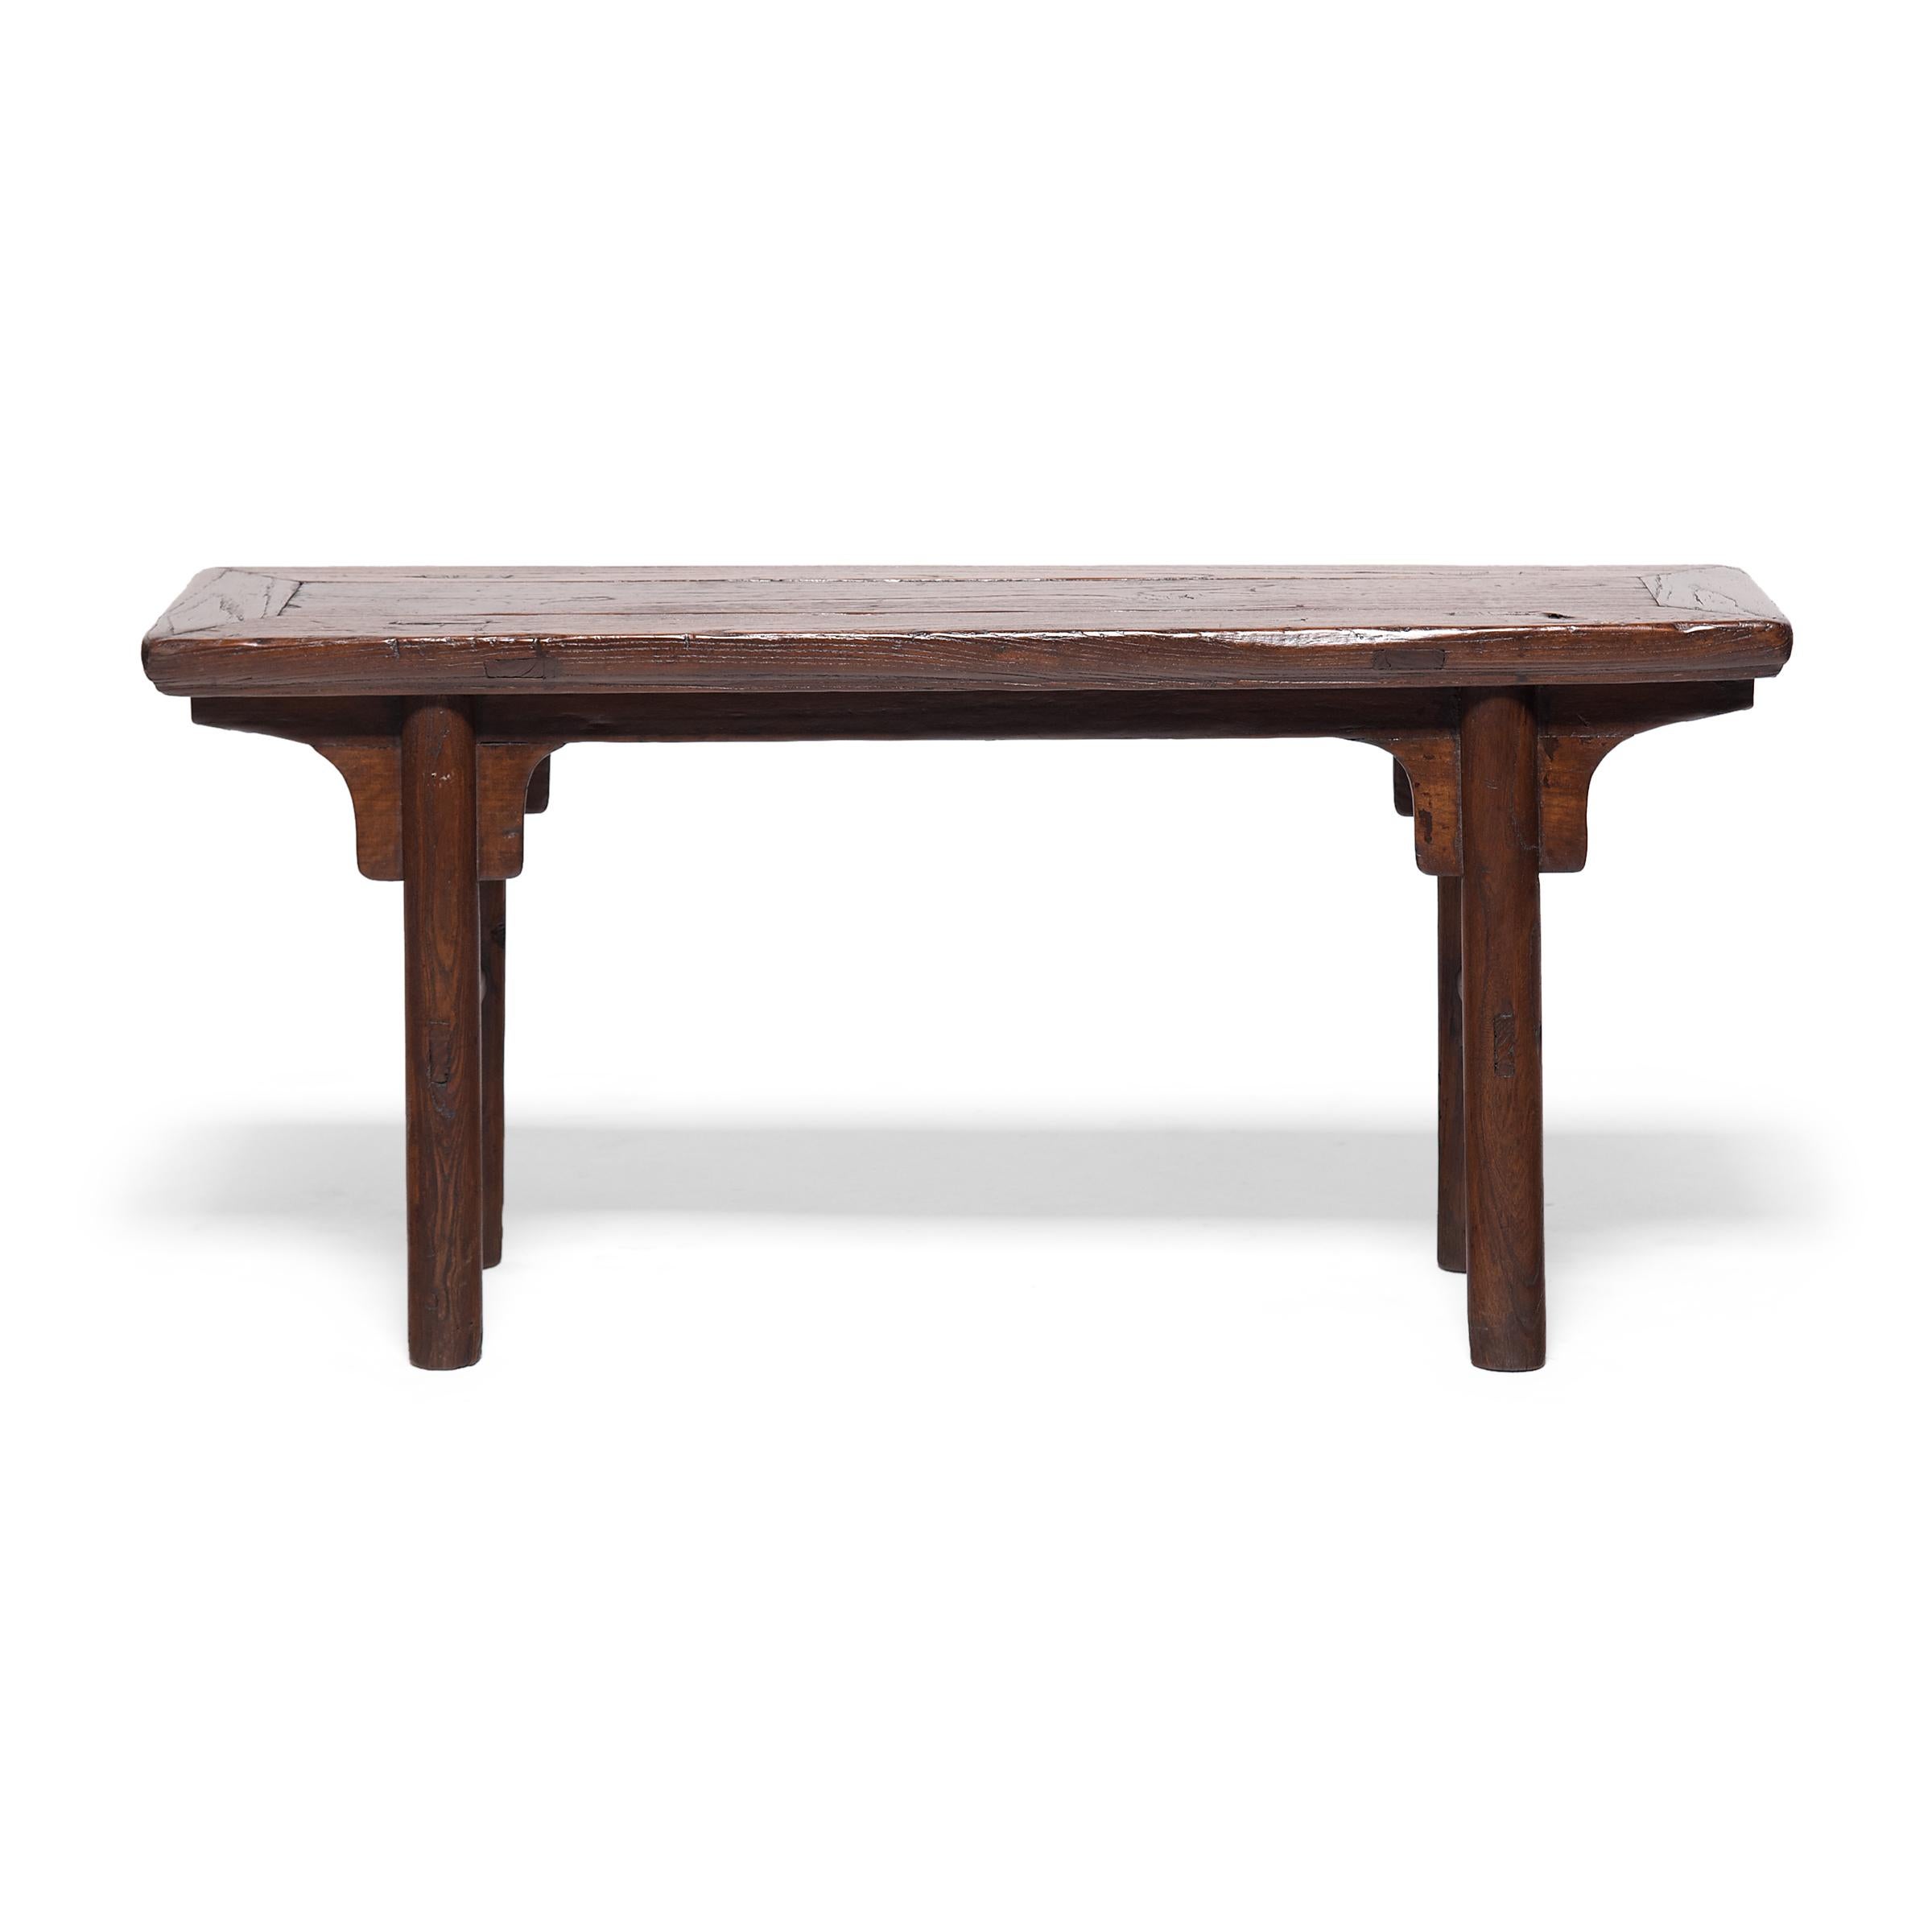 These early 20th century elmwood benches would have originally resided in the courtyard of a Qing-dynasty home to provide much-needed outdoor seating on hot summer days. The benches are designed in a classical Ming style, with a floating panel top,